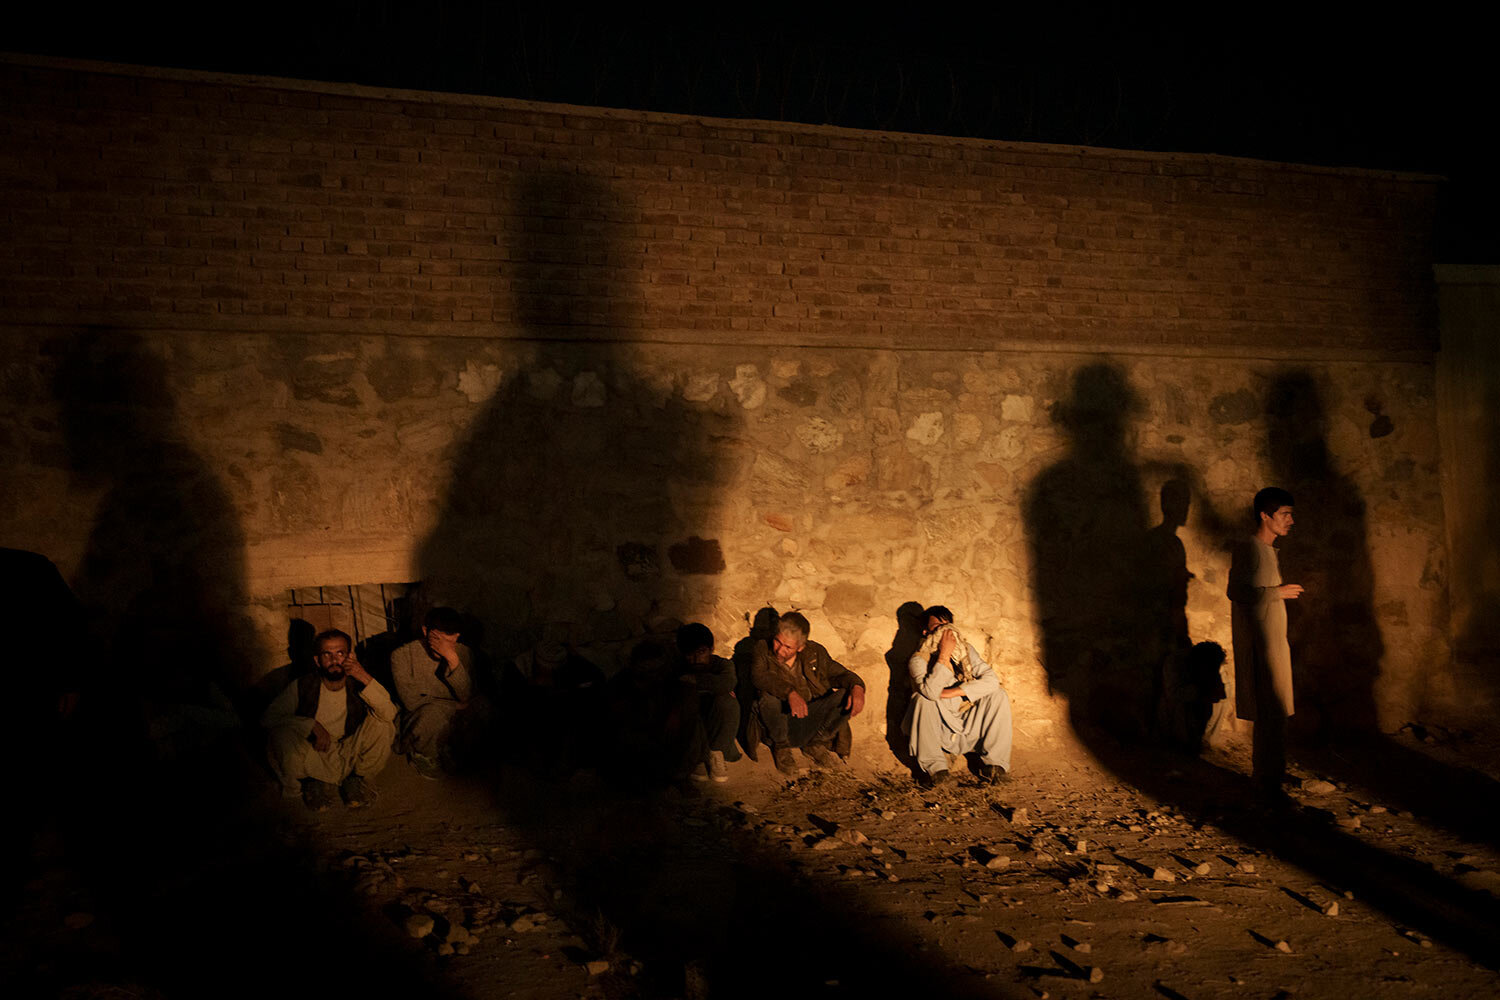  The shadow of Taliban fighters casts over drug users detained at a police station in Kabul, Afghanistan, Friday, Oct. 1, 2021. (AP Photo/Felipe Dana) 